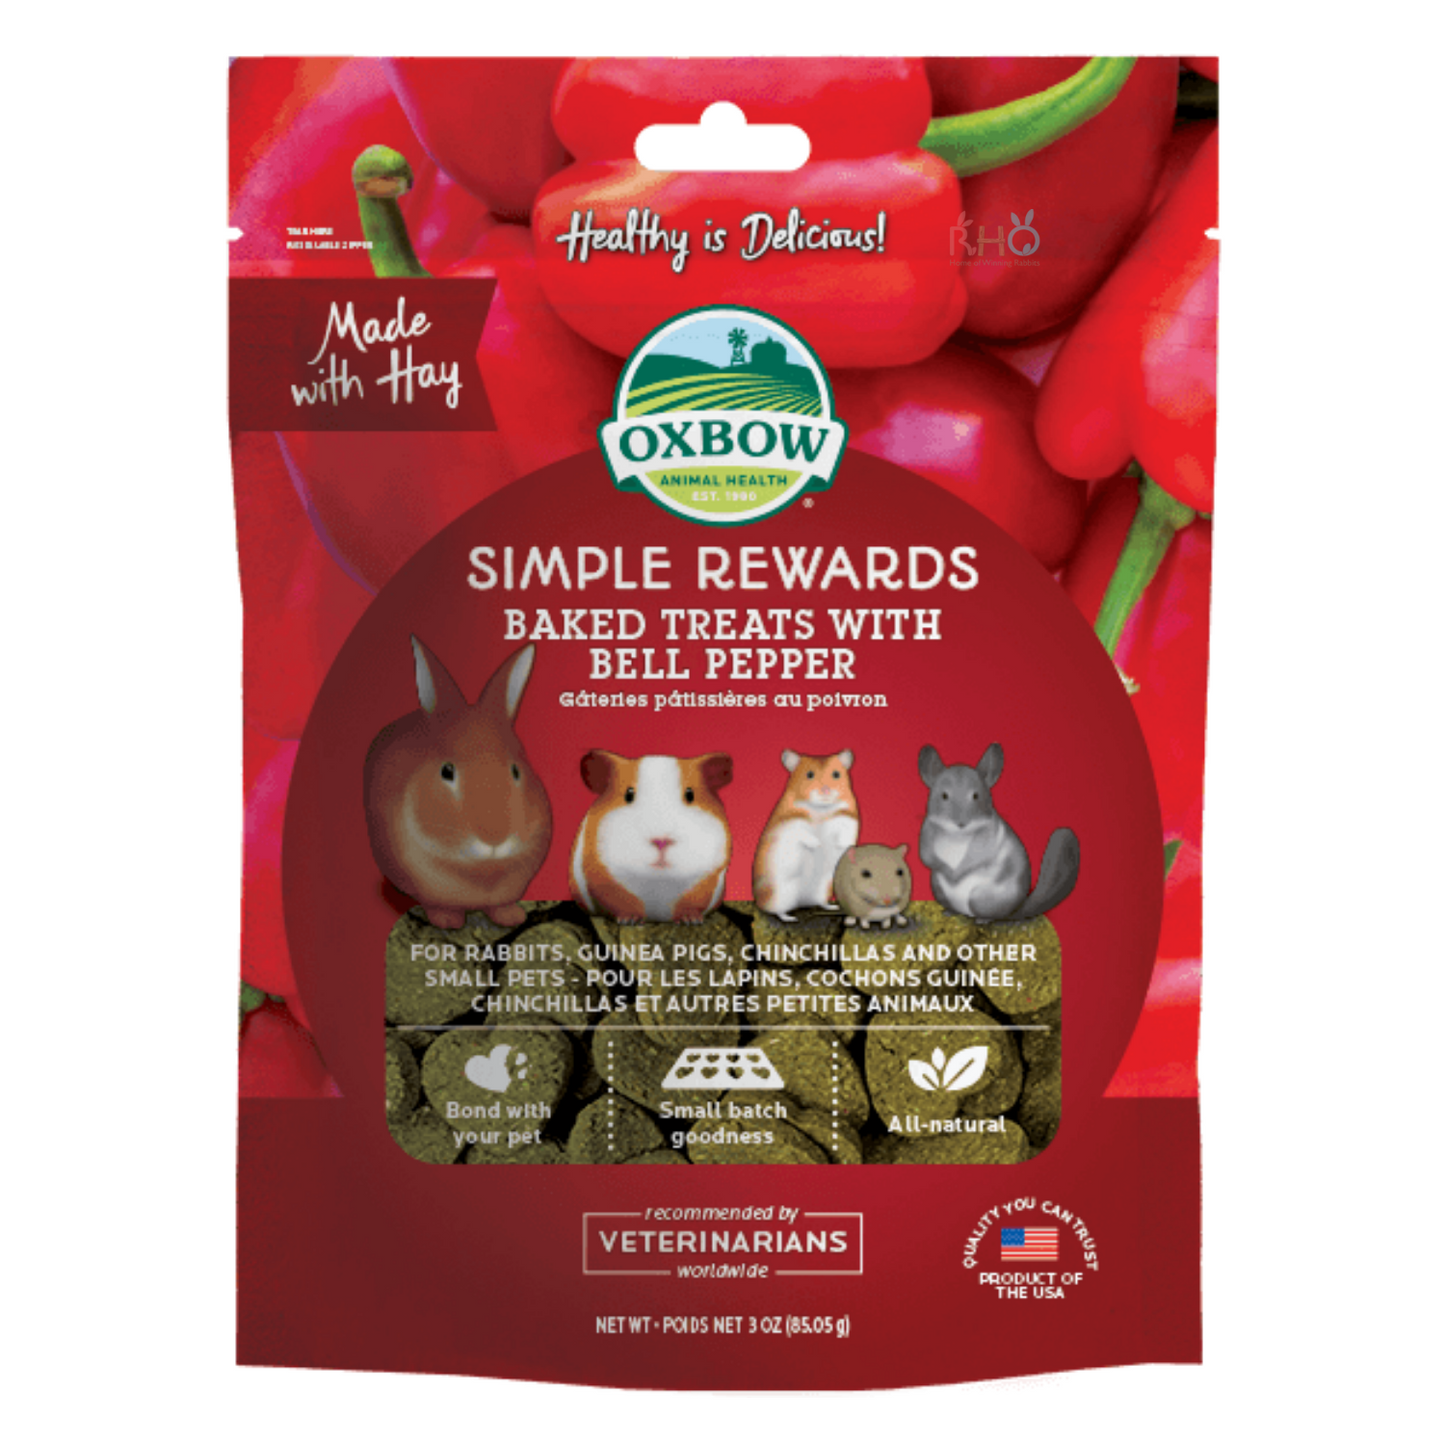 Oxbow Simple Rewards Baked Treats with Bell Pepper 85.05g